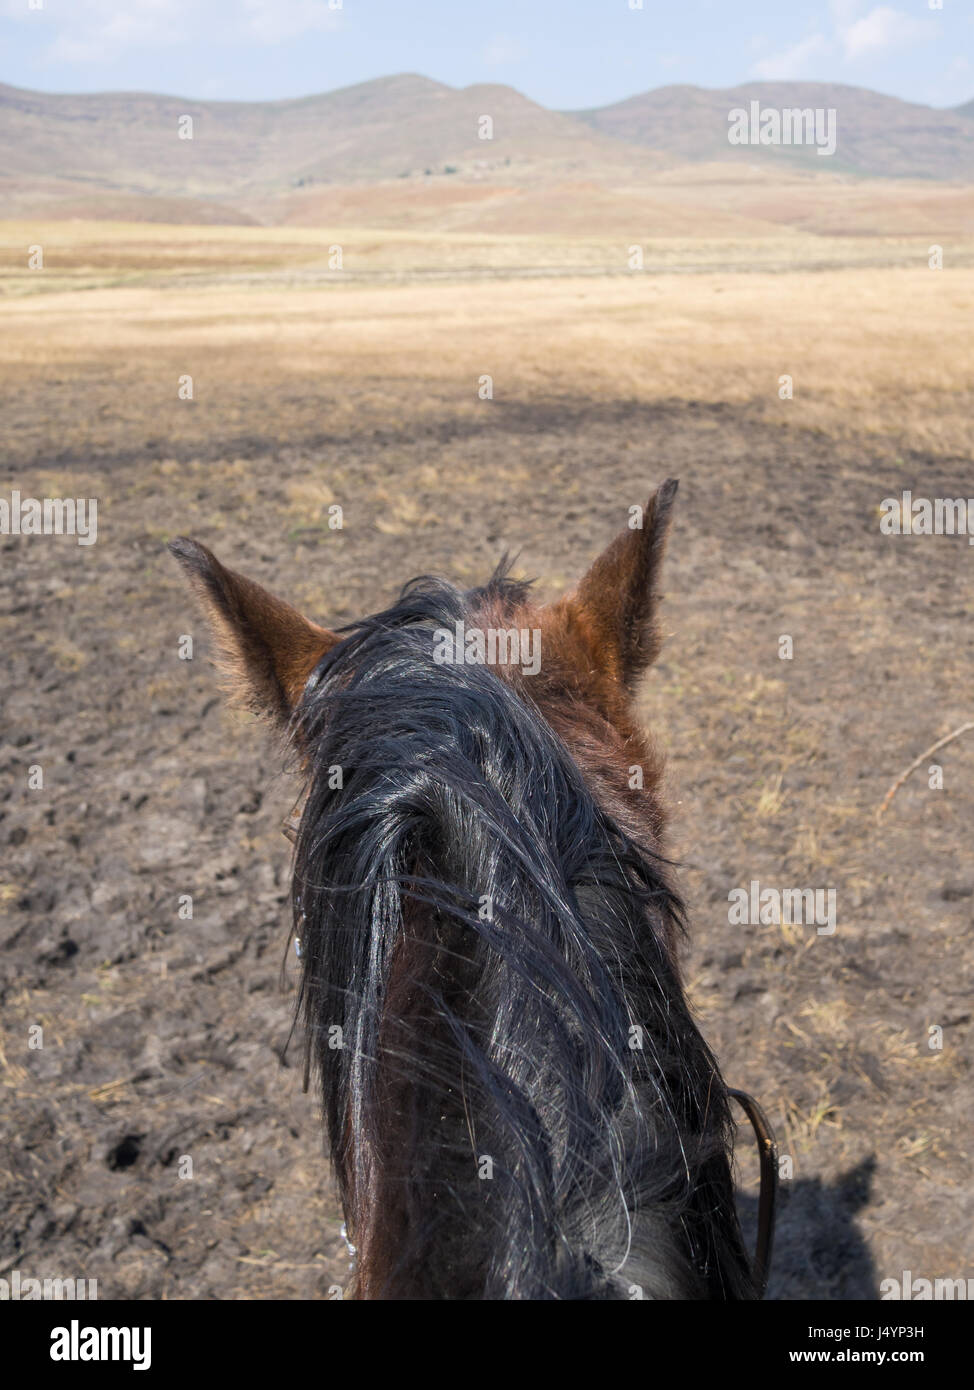 Point of view shot of a basuto pony head from a horse riders perspective, mountains of Lesotho, Africa. Stock Photo